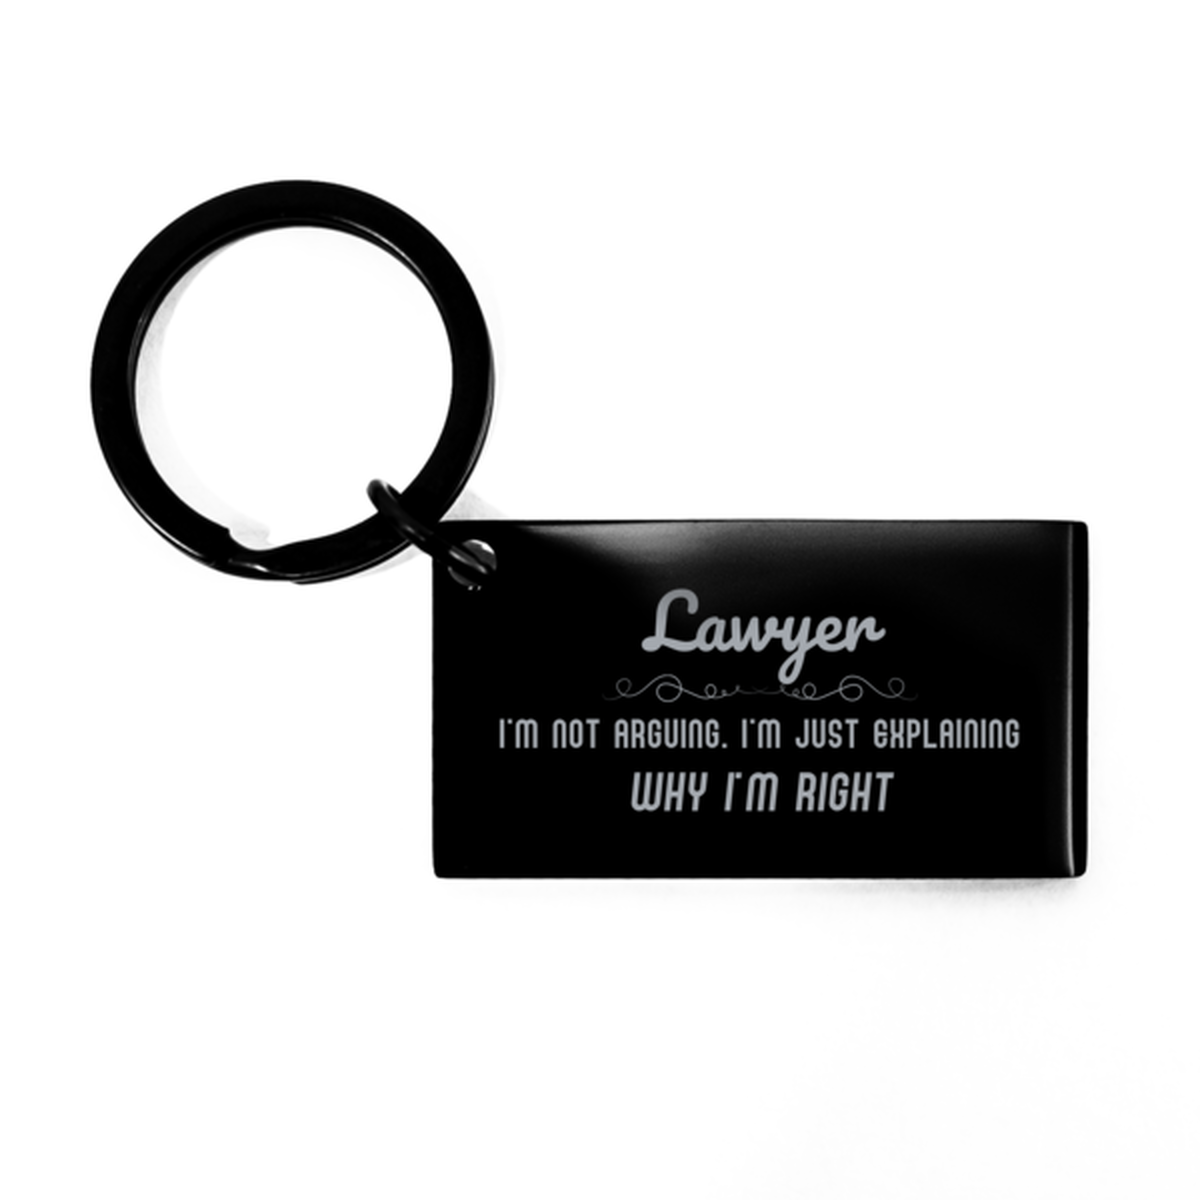 Lawyer I'm not Arguing. I'm Just Explaining Why I'm RIGHT Keychain, Funny Saying Quote Lawyer Gifts For Lawyer Graduation Birthday Christmas Gifts for Men Women Coworker